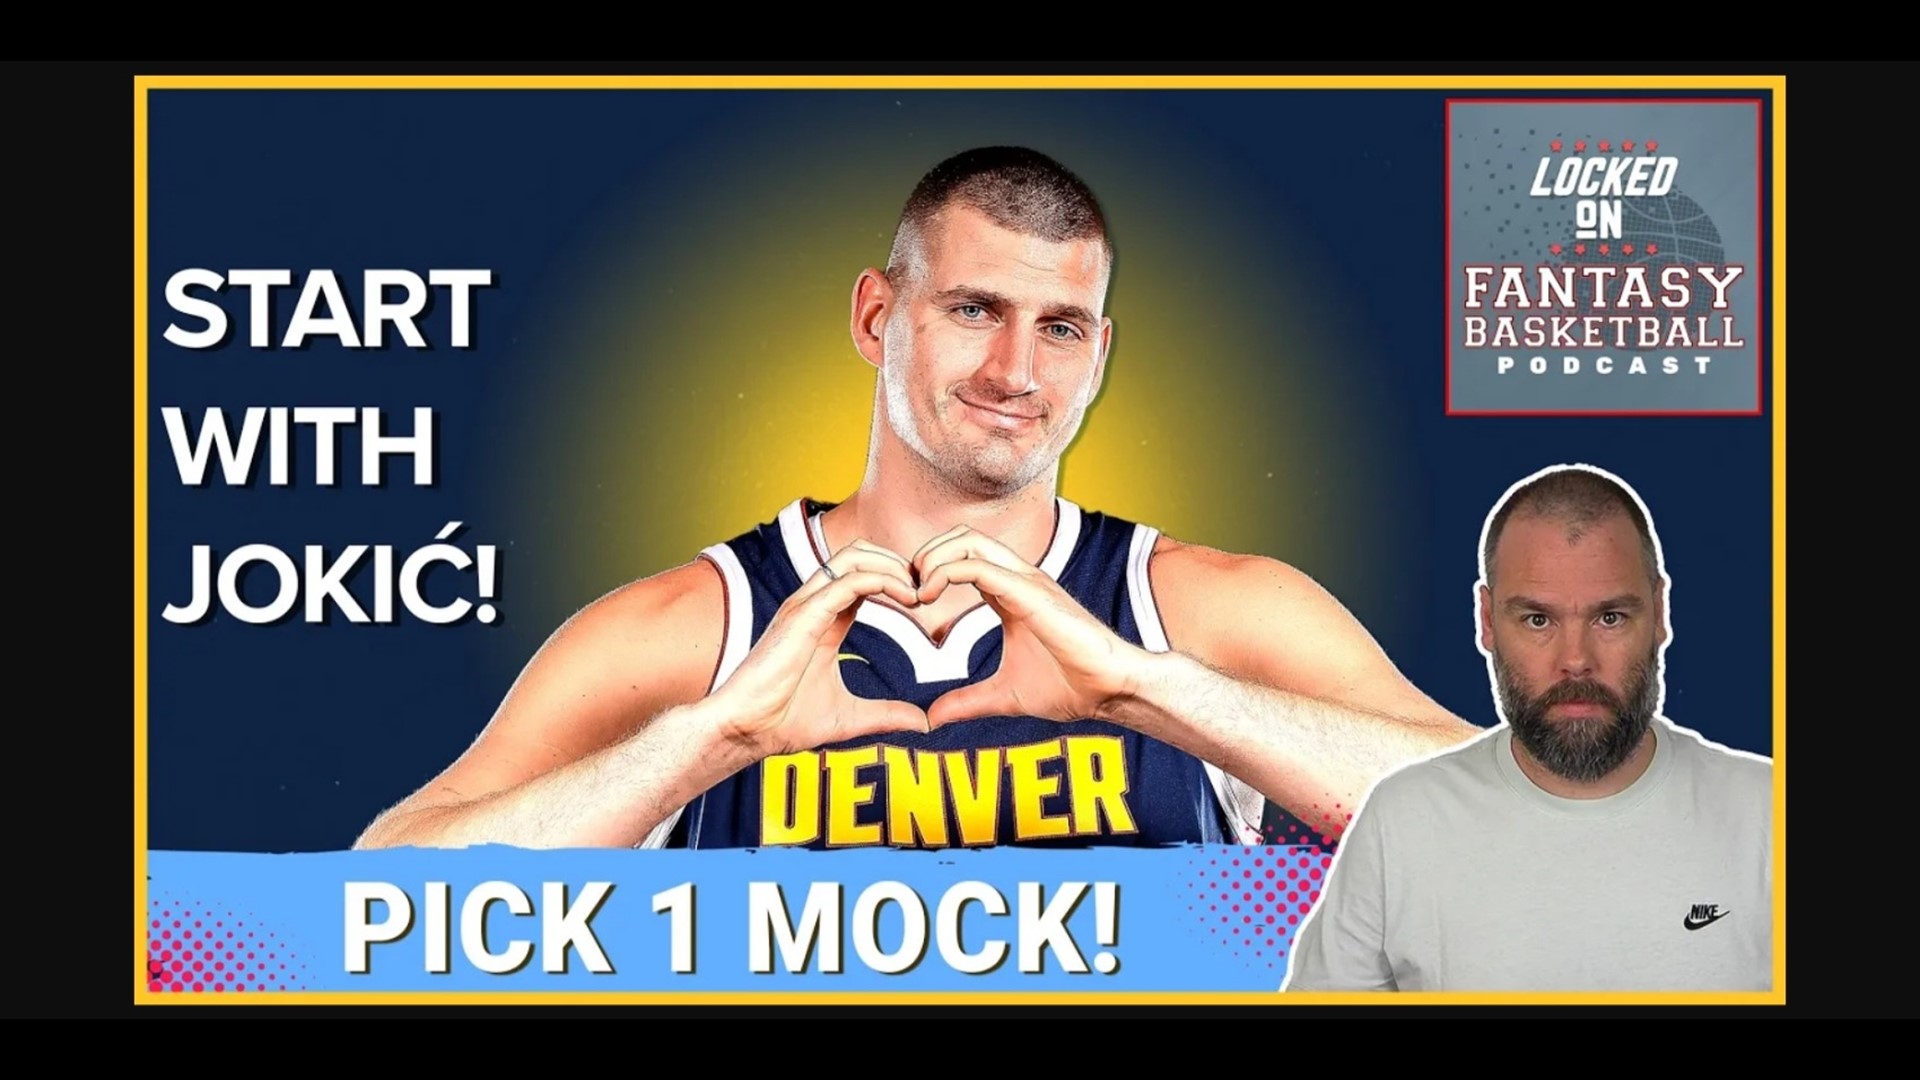 Starting Strong With Jokic: Fantasy Basketball Mock Draft From Pick 1